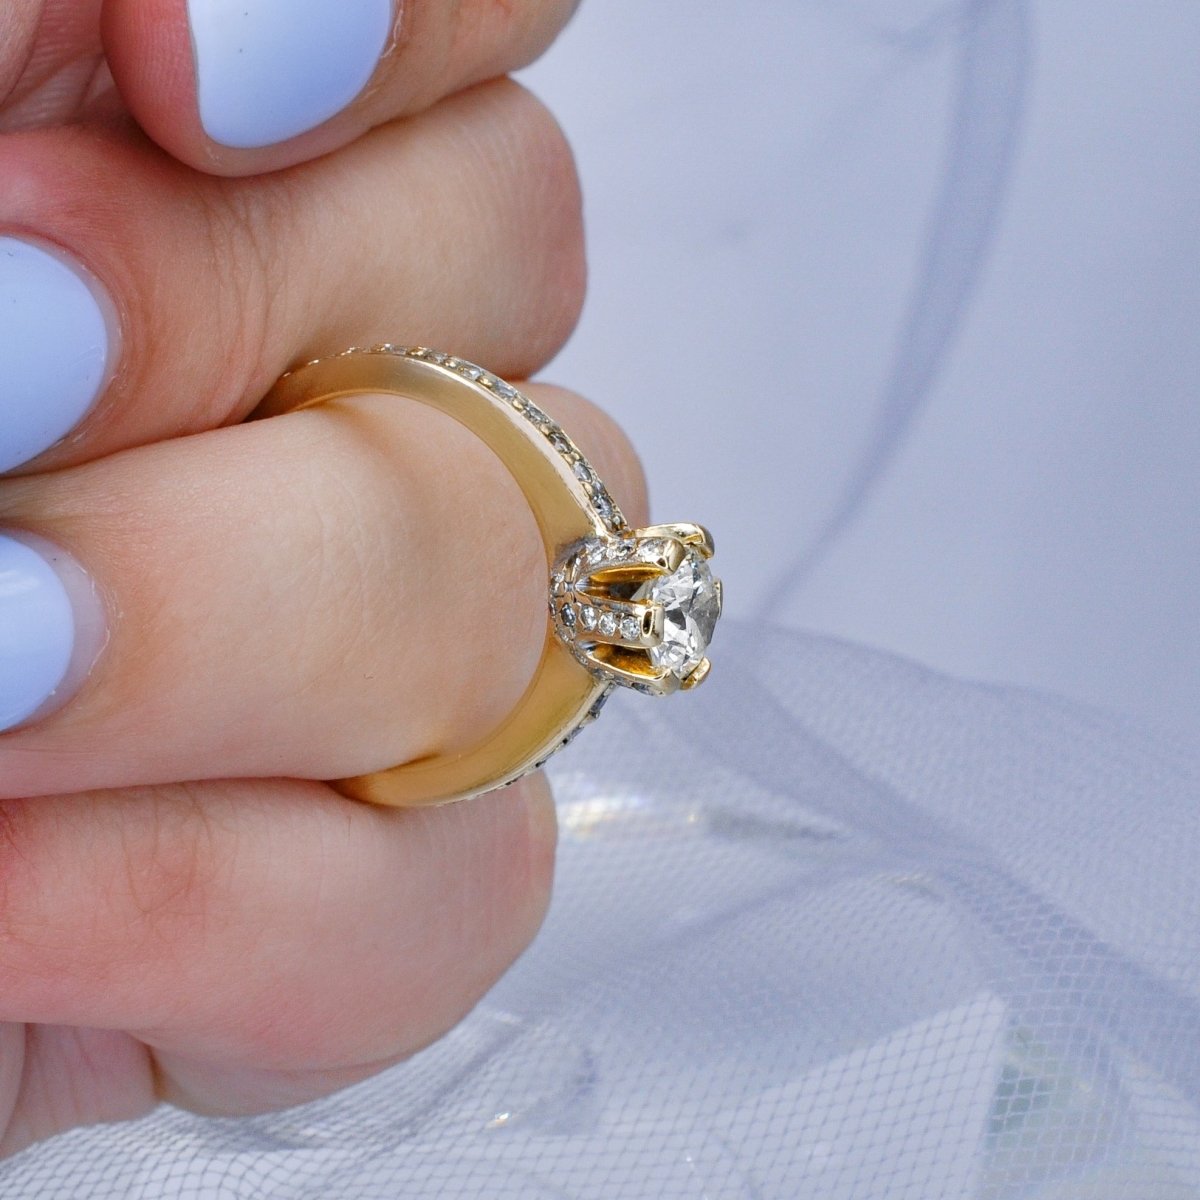 Limited 1.35 CT Round Cut Diamond Engagement Ring in 14KT Yellow Gold - Primestyle.com